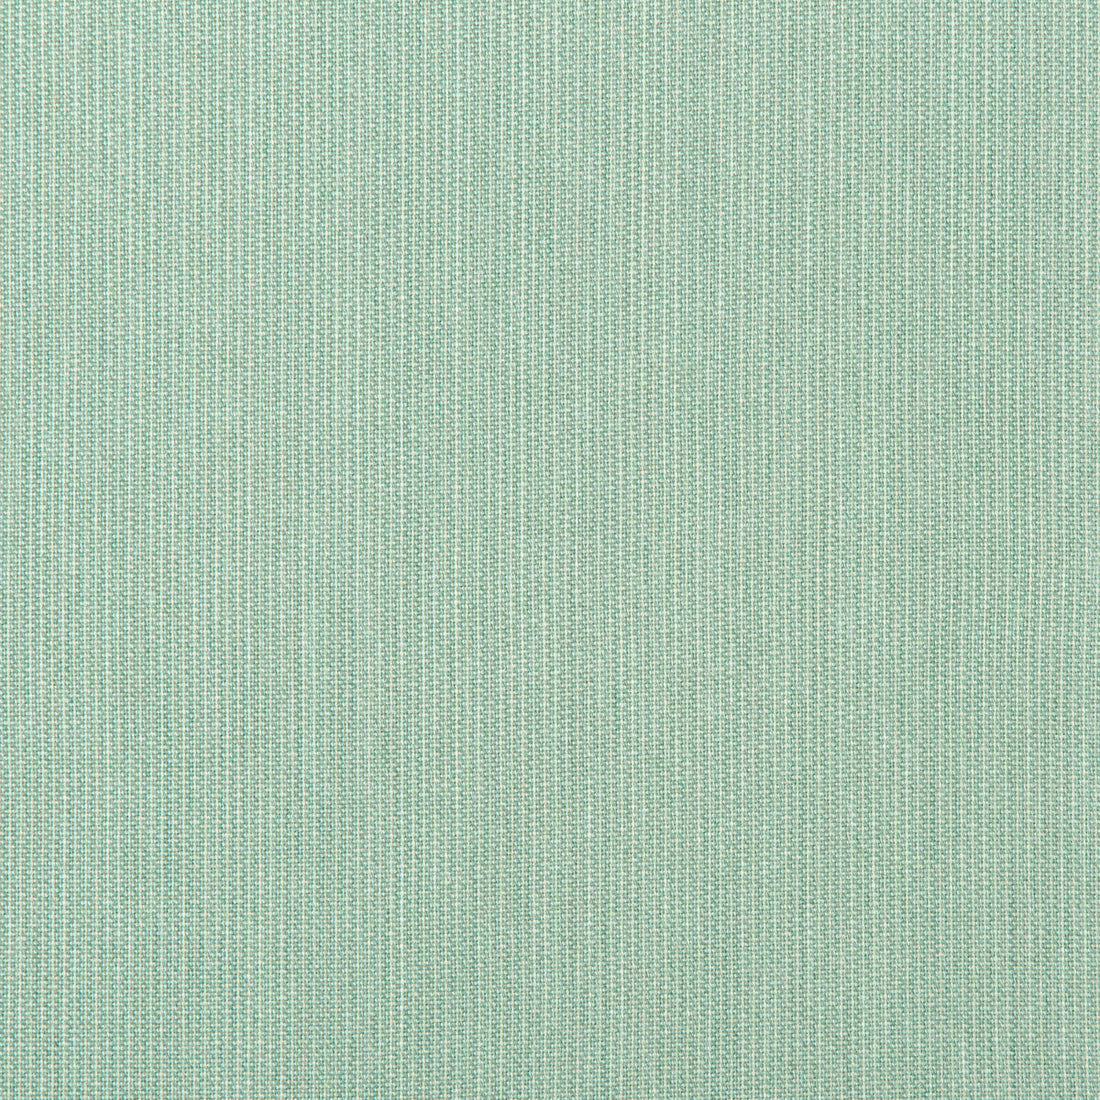 Kravet Basics fabric in 36820-35 color - pattern 36820.35.0 - by Kravet Basics in the Indoor / Outdoor collection